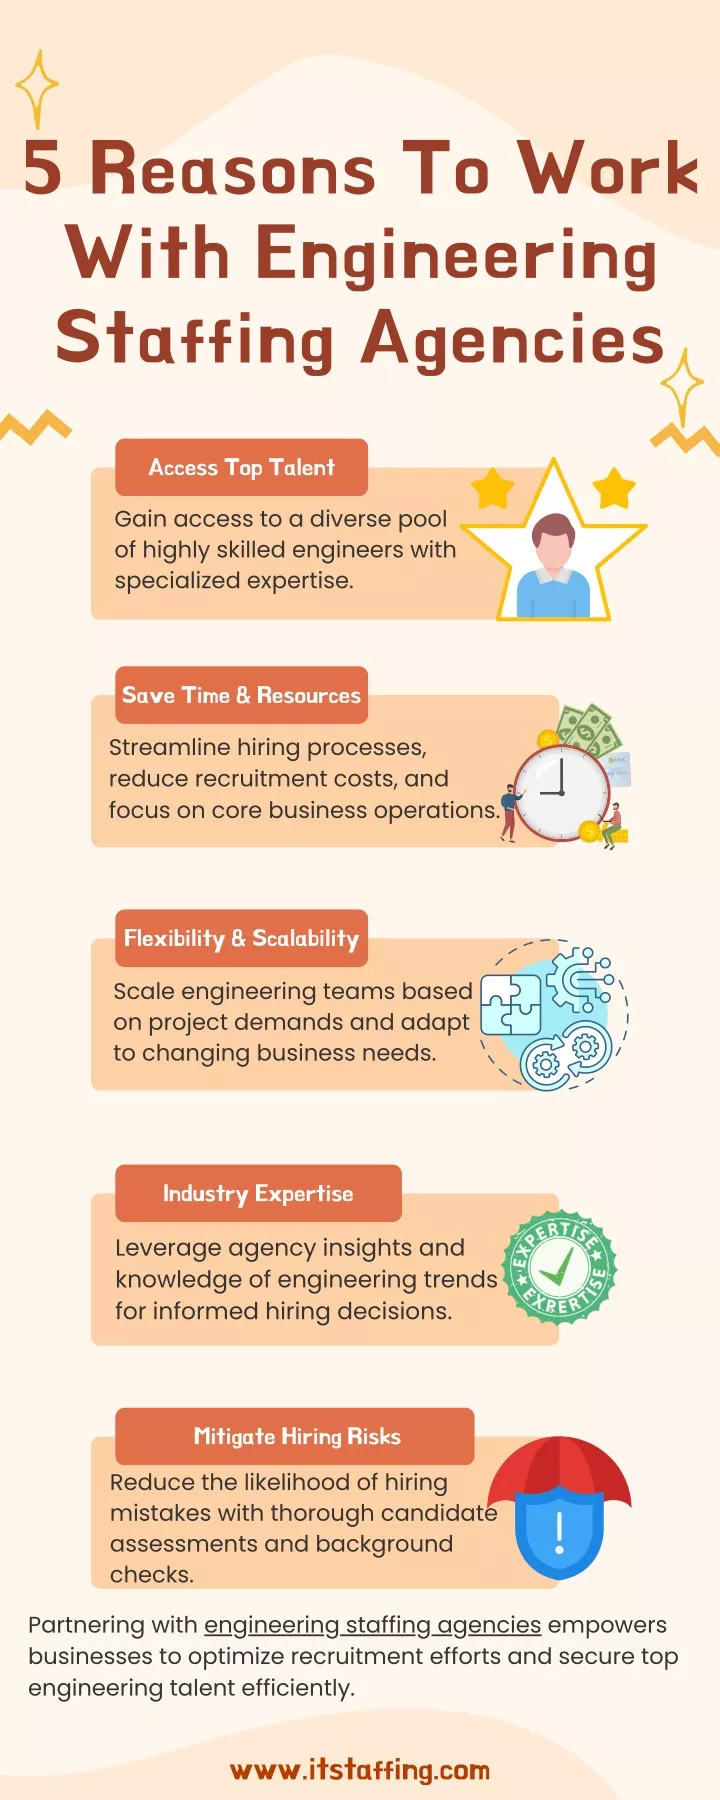 5 reasons to work with engineering staffing